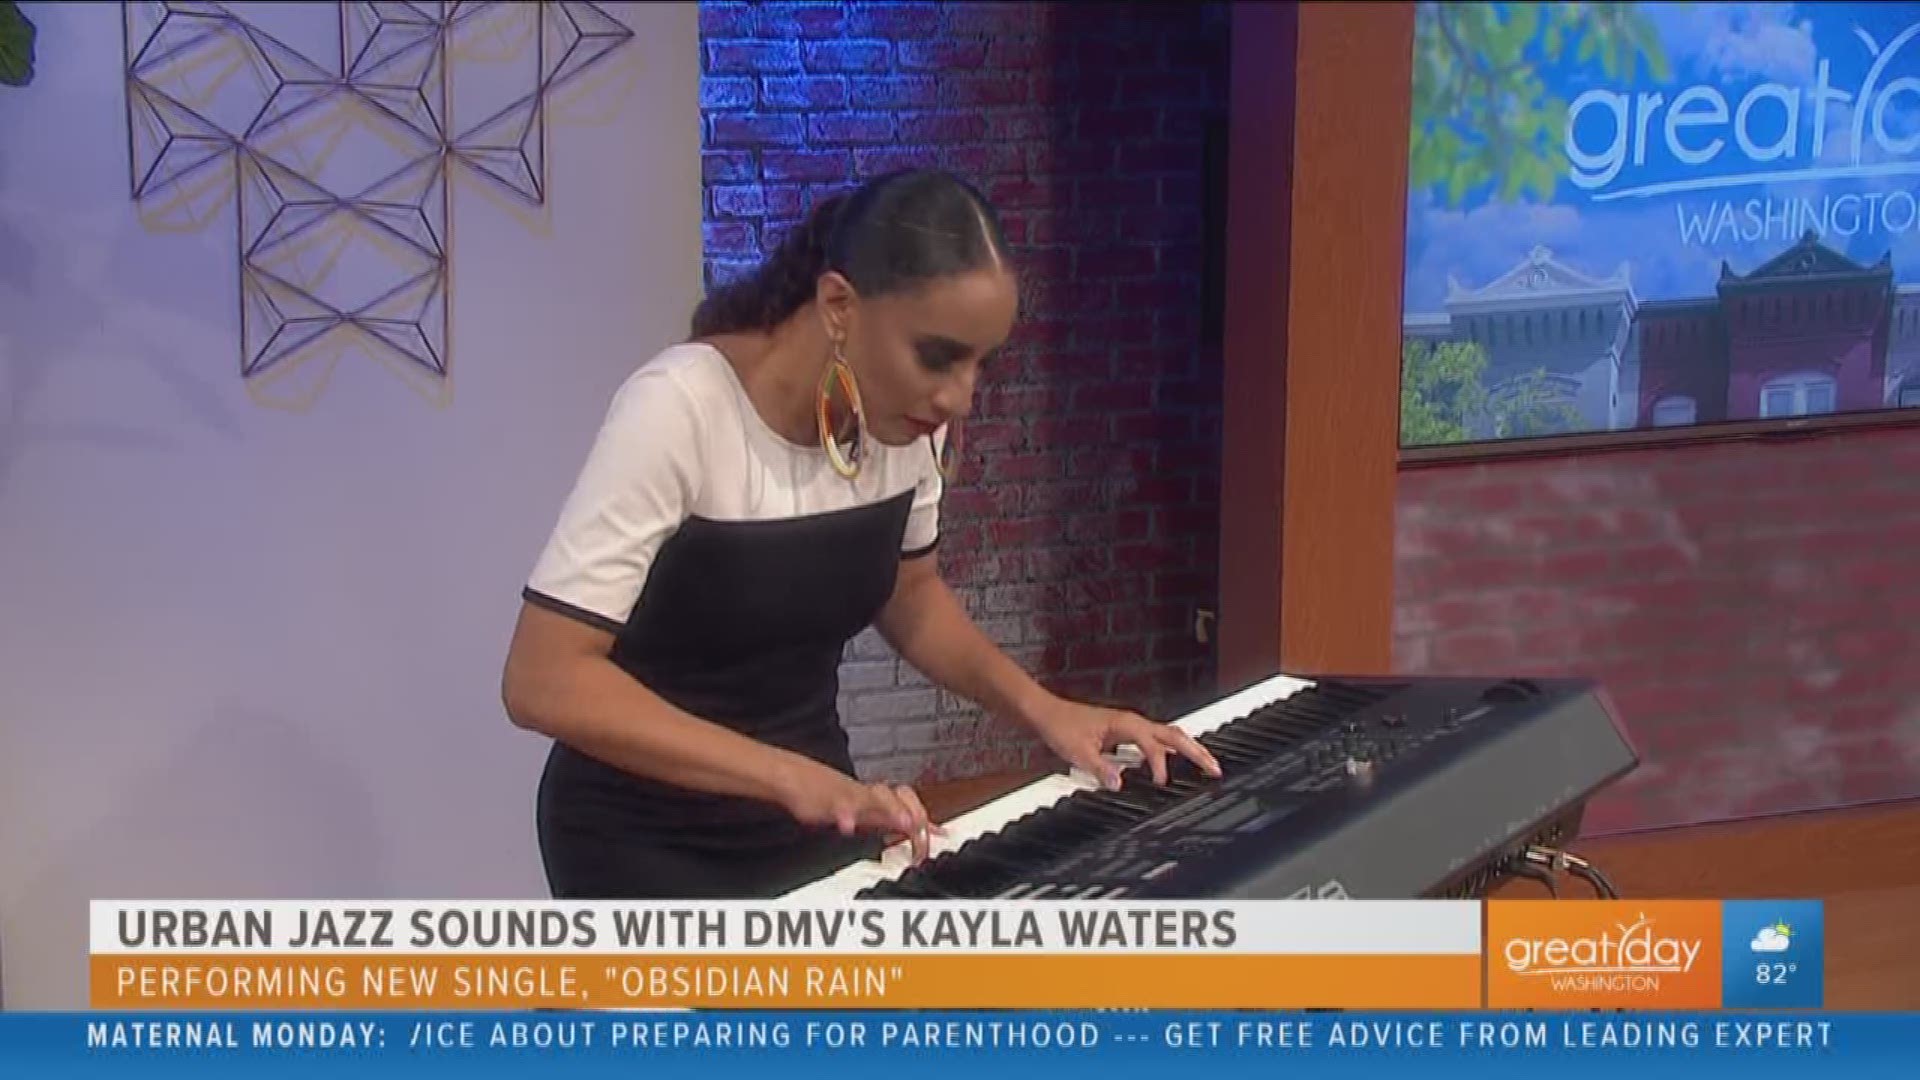 Kayla Waters stops by the Great Day studios to perform her new single, Obsidian Rain.